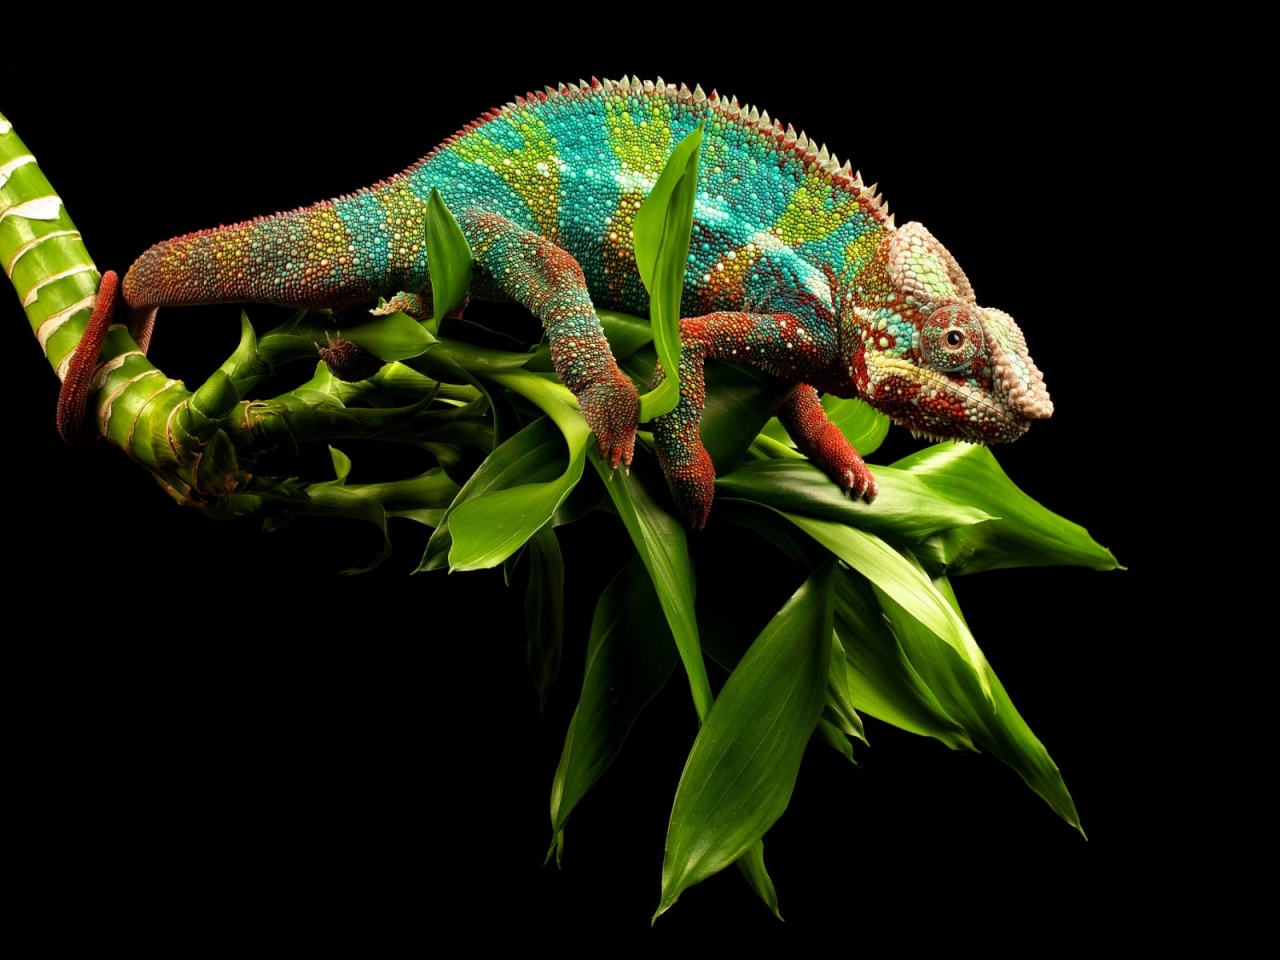 Young Chameleon for 1280 x 960 resolution